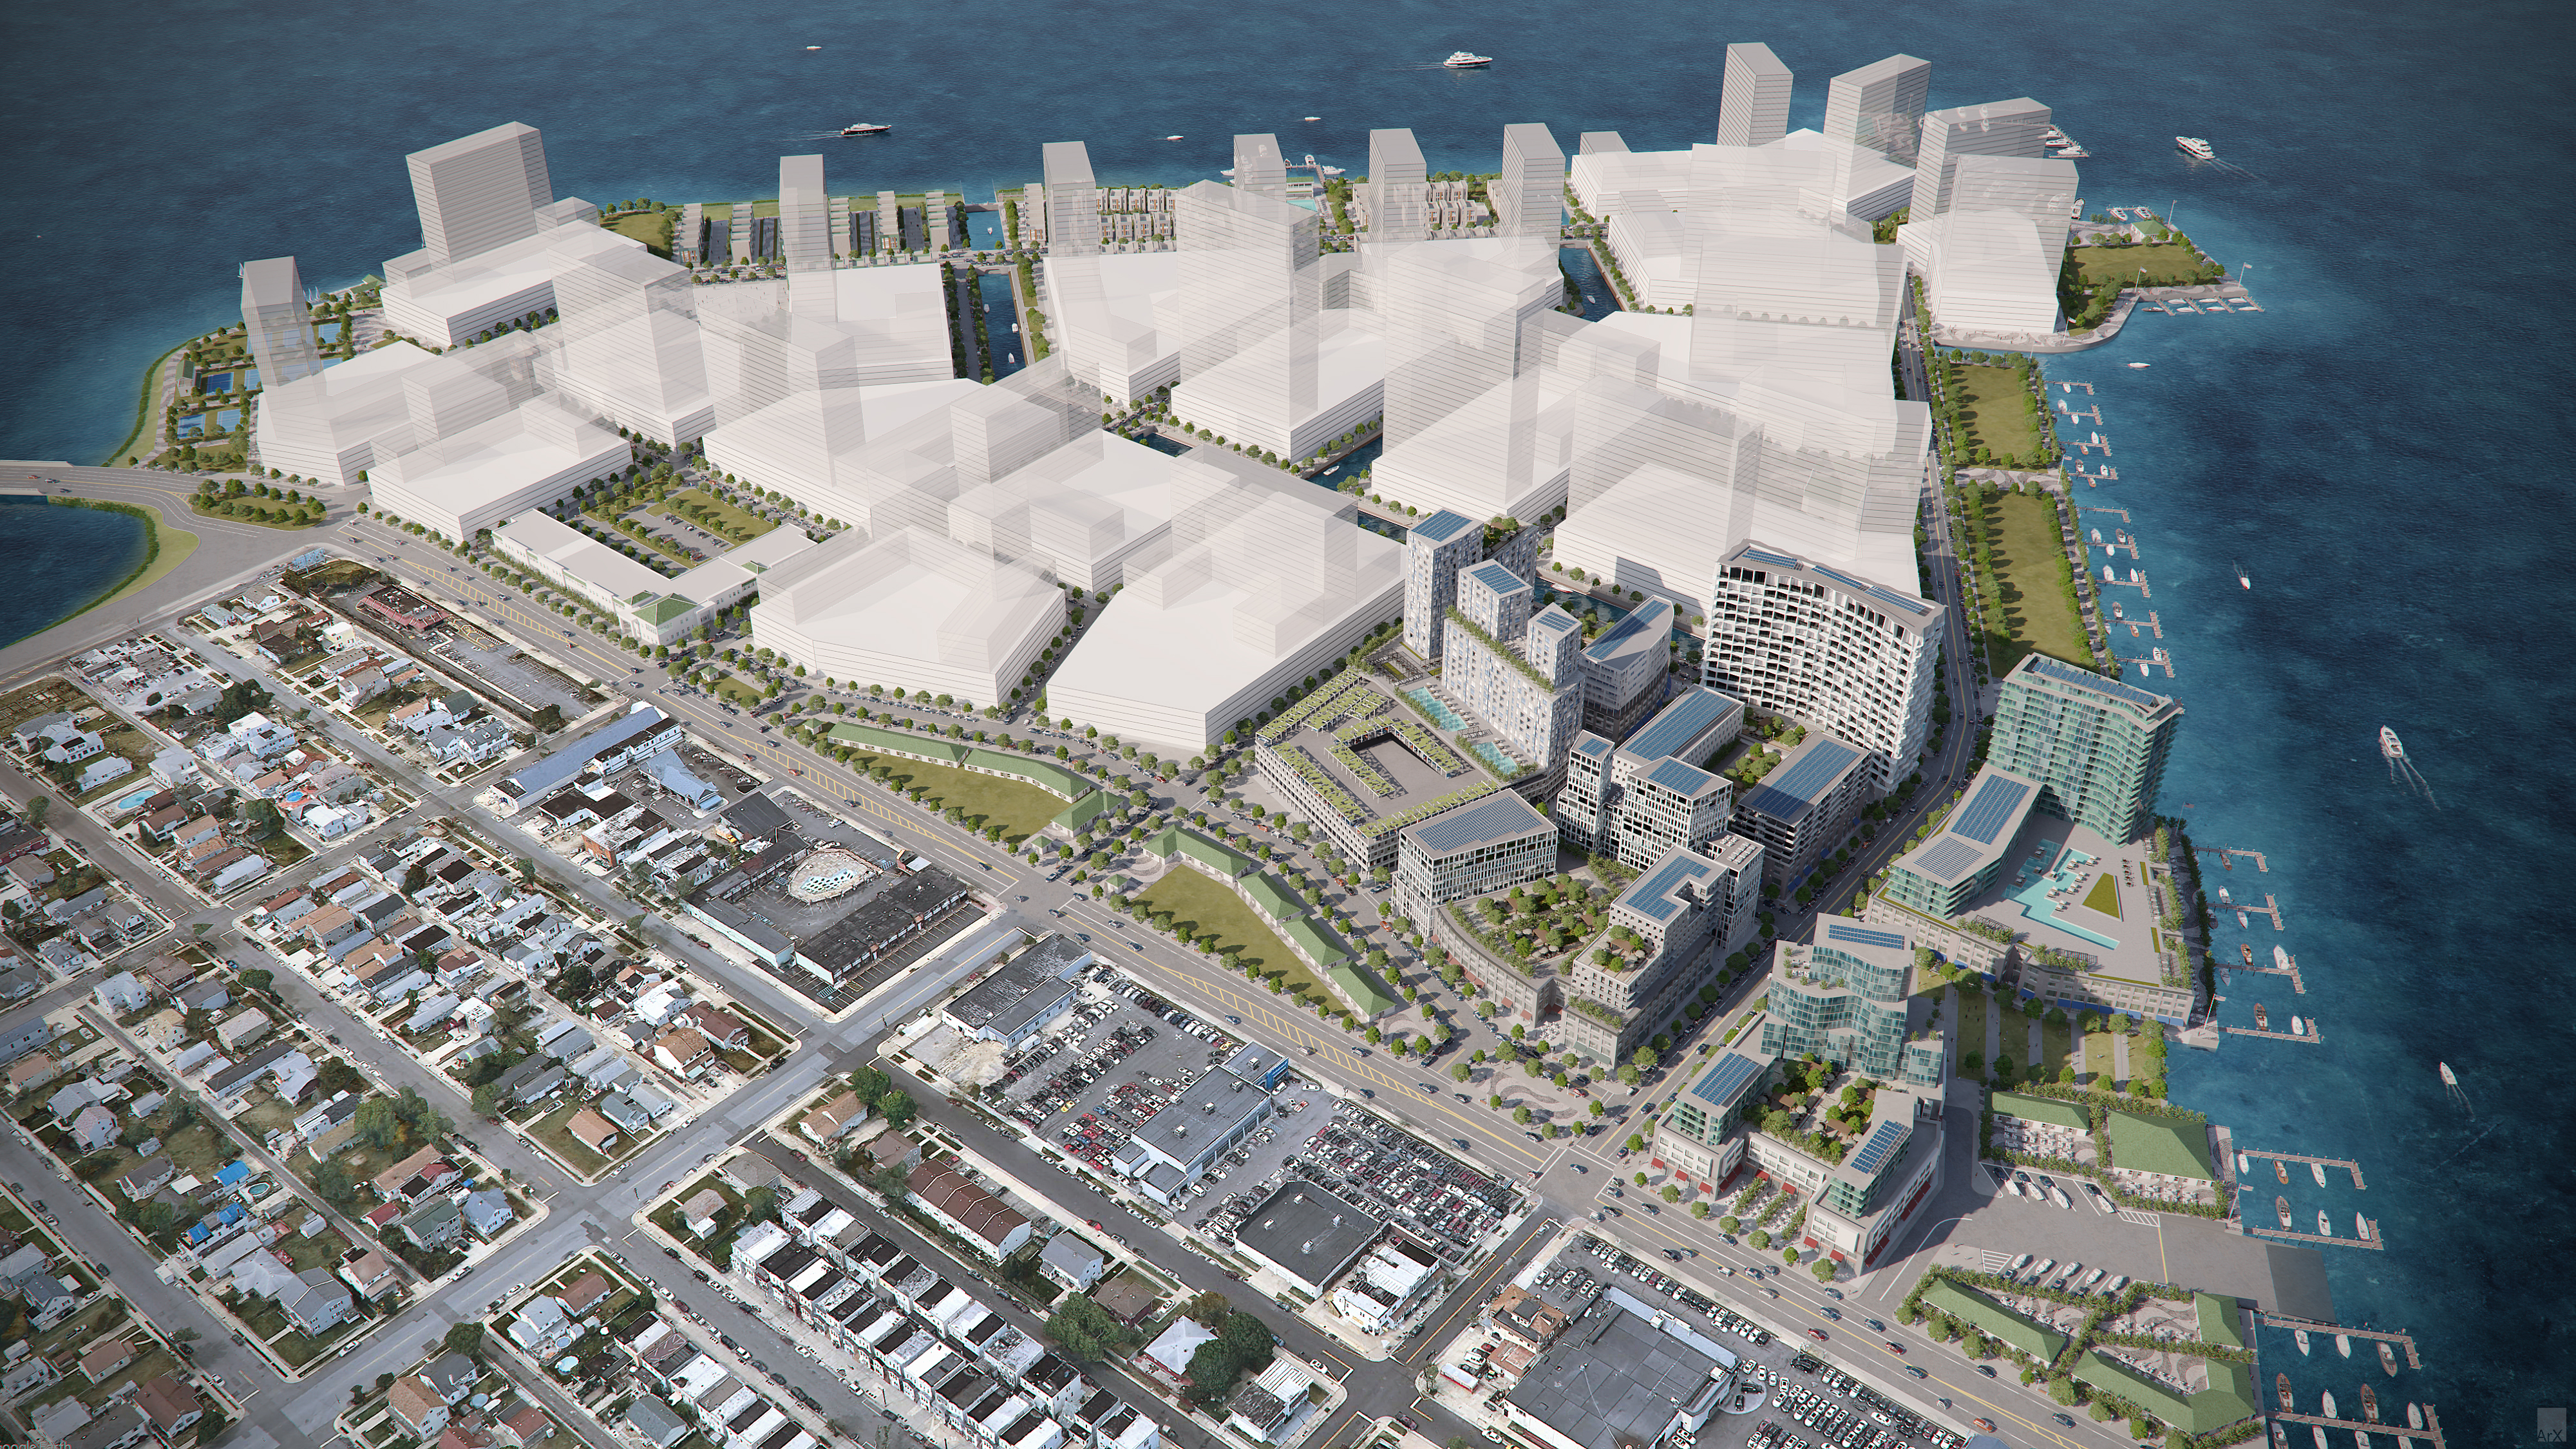 Blatstein, Post Brothers Announce $3B Proposal For Mixed-Use Neighborhood  In Atlantic City